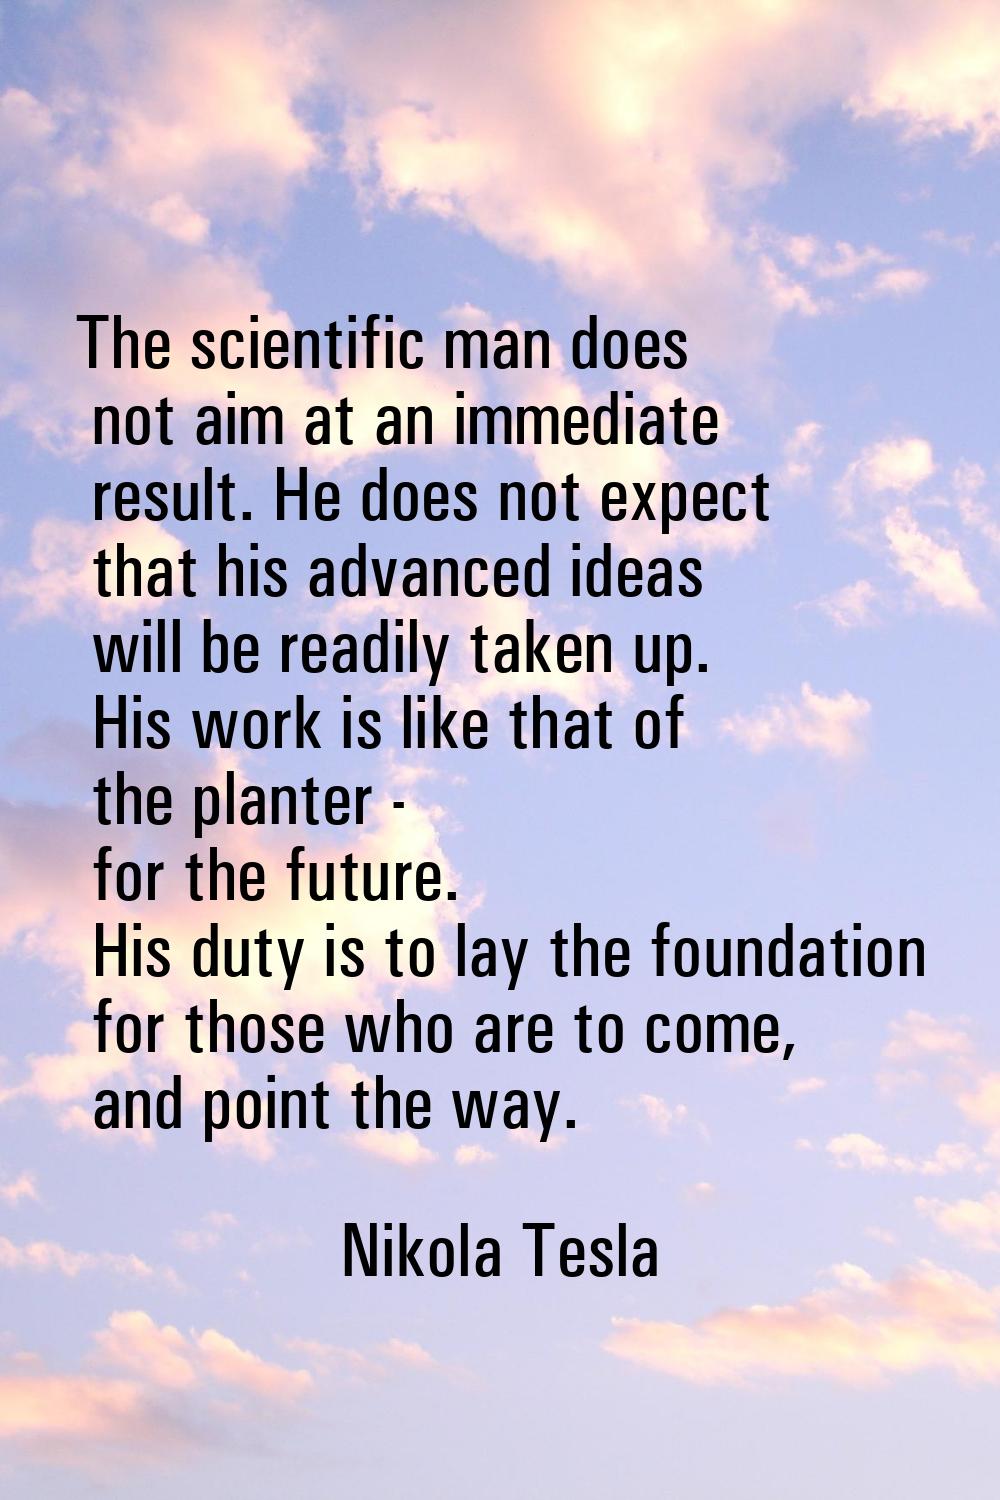 The scientific man does not aim at an immediate result. He does not expect that his advanced ideas 